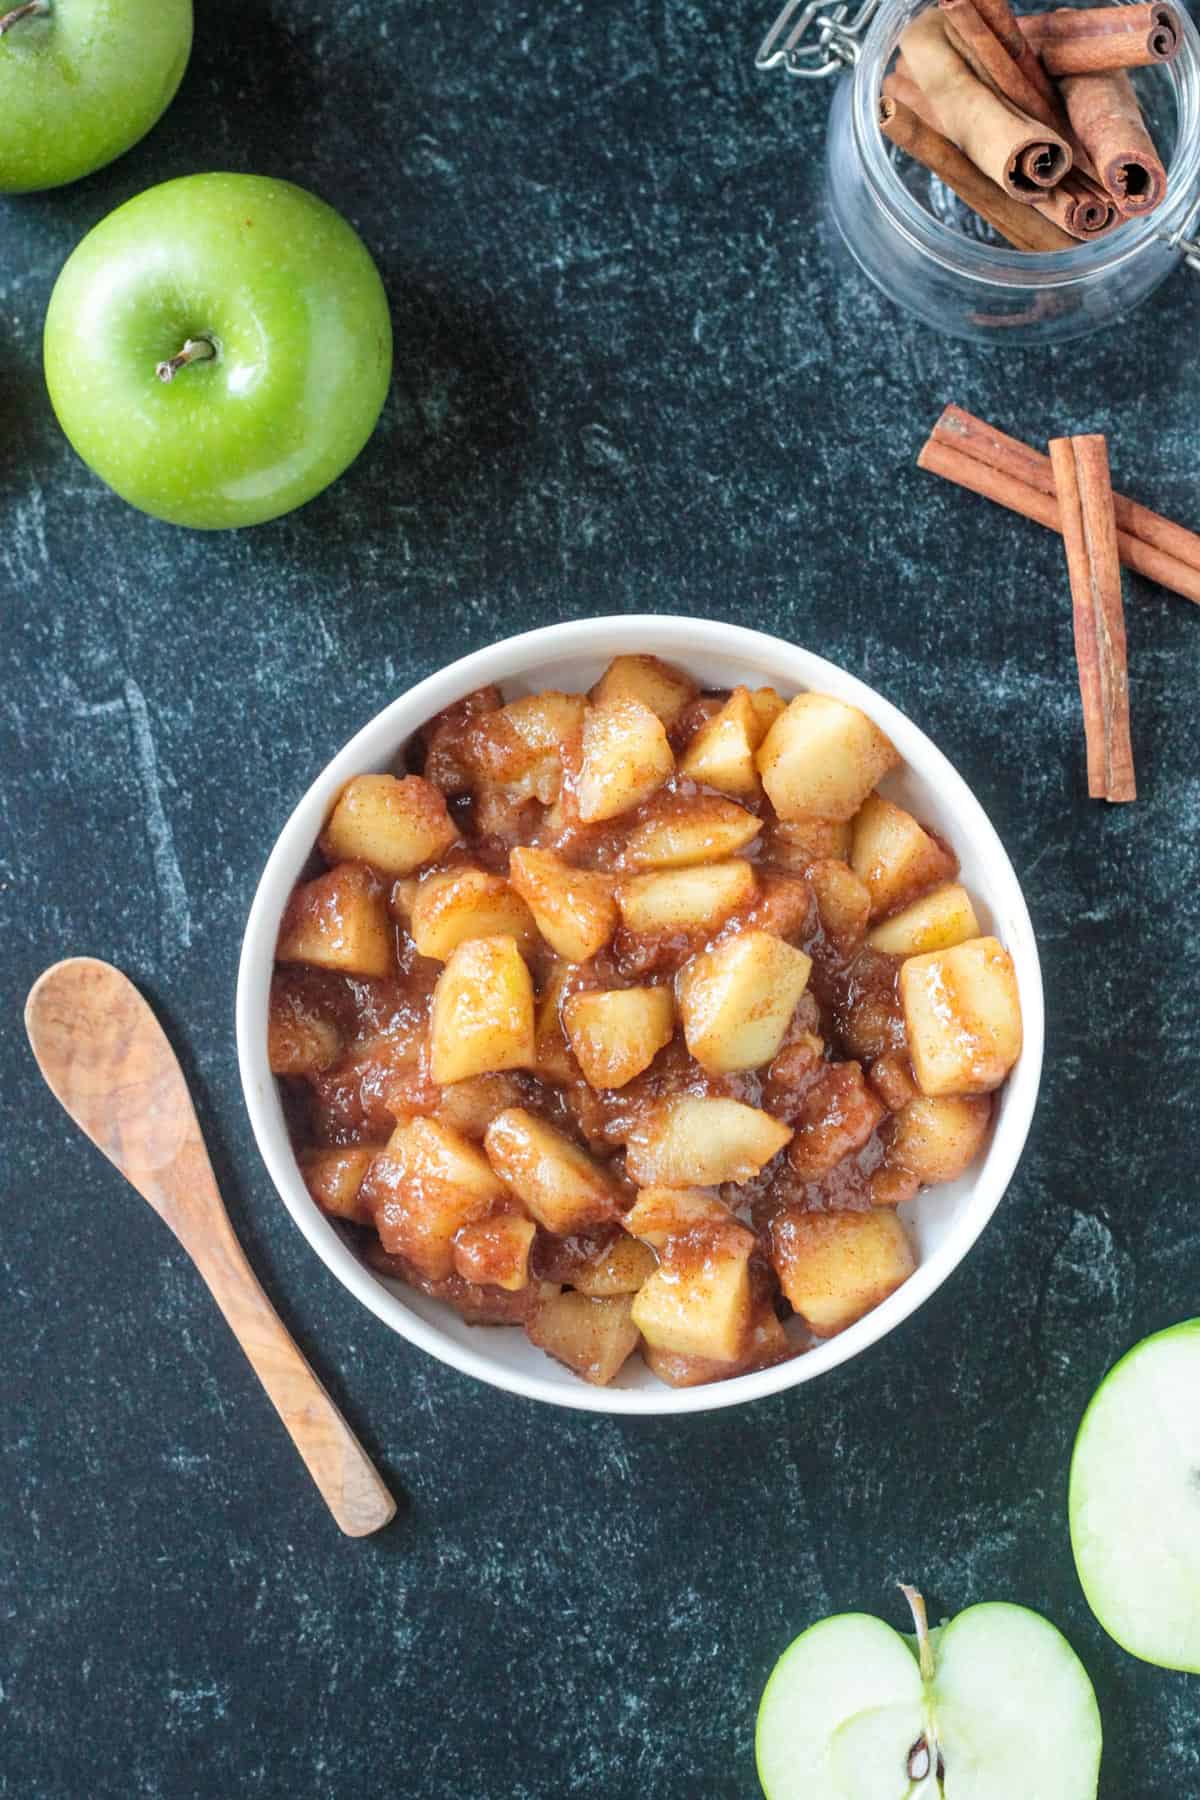 Cinnamon spiced apples in a bowl.